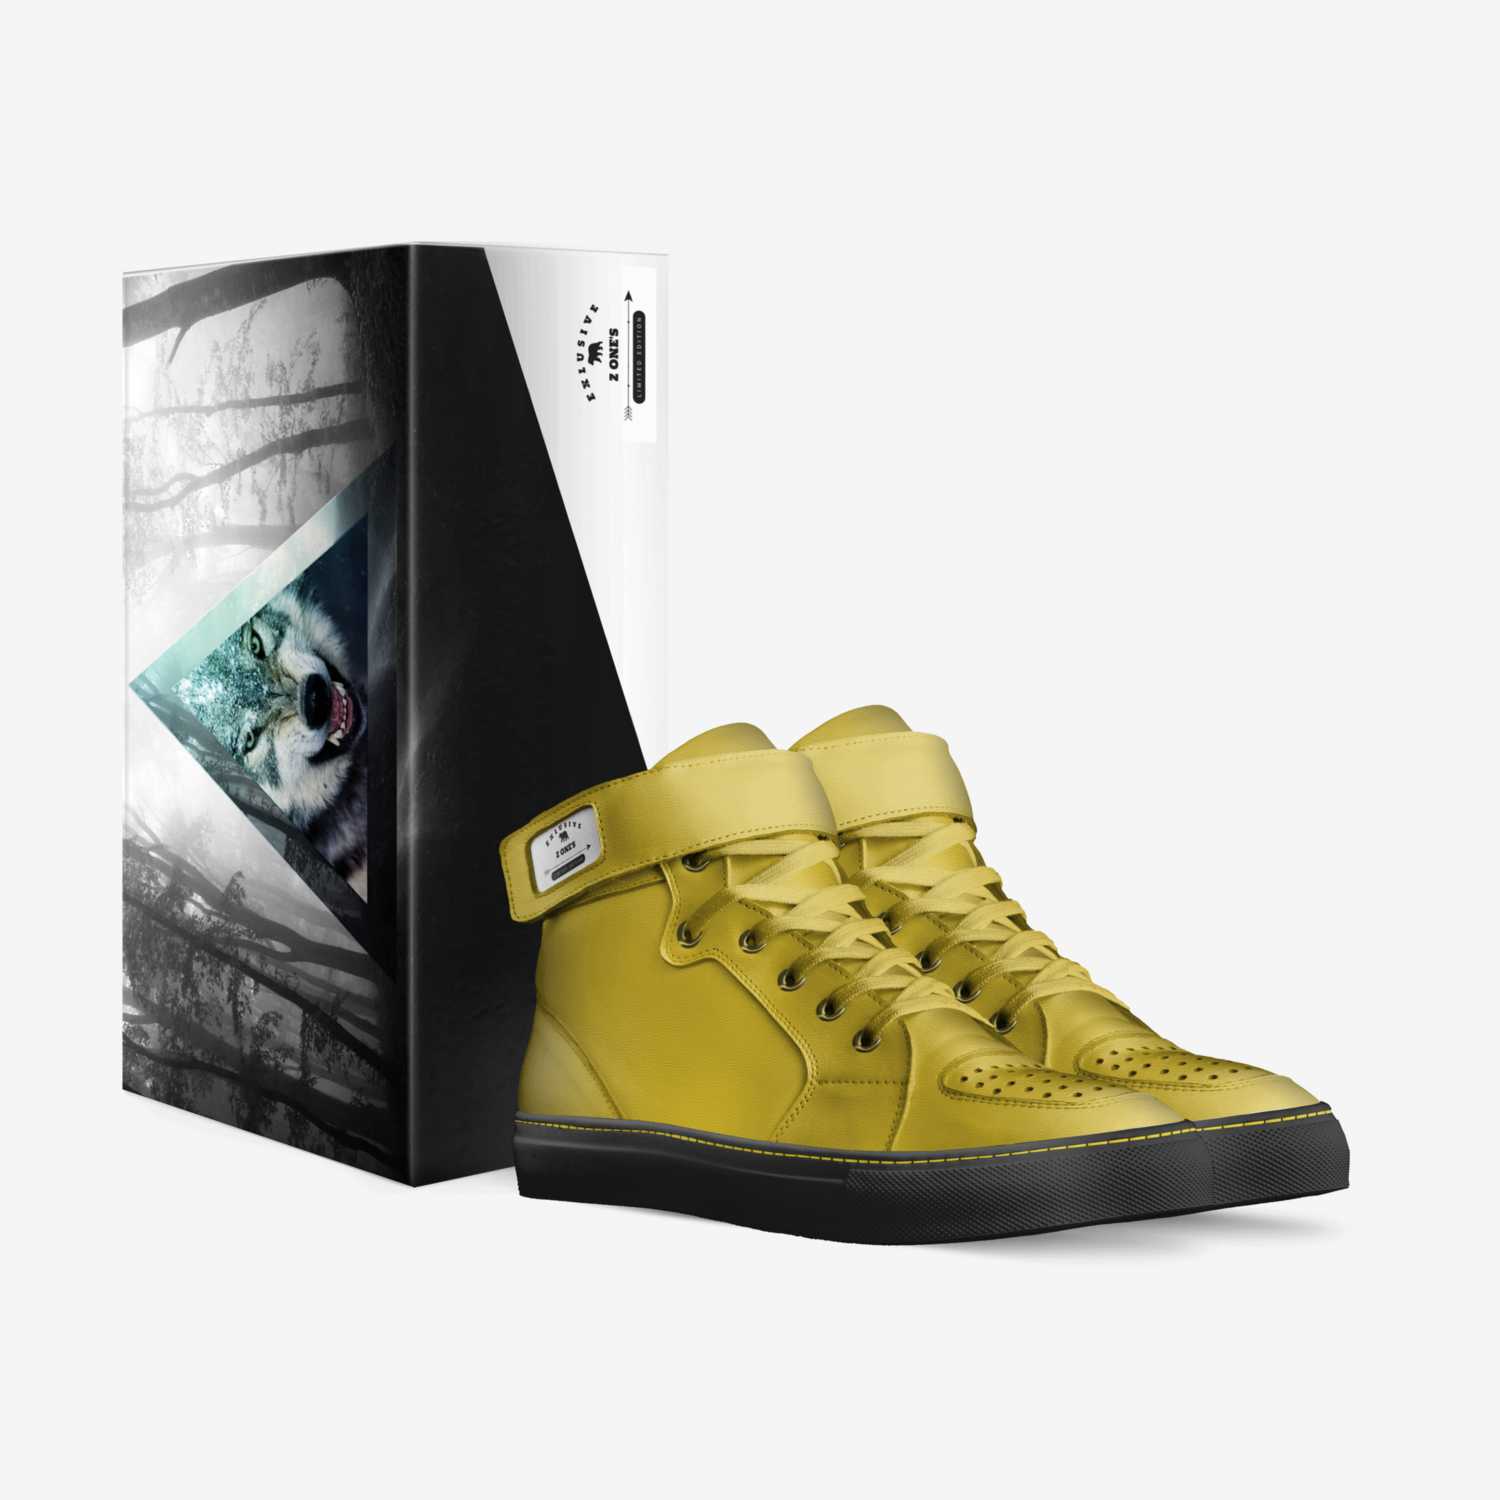 z one's custom made in Italy shoes by Zach Young | Box view